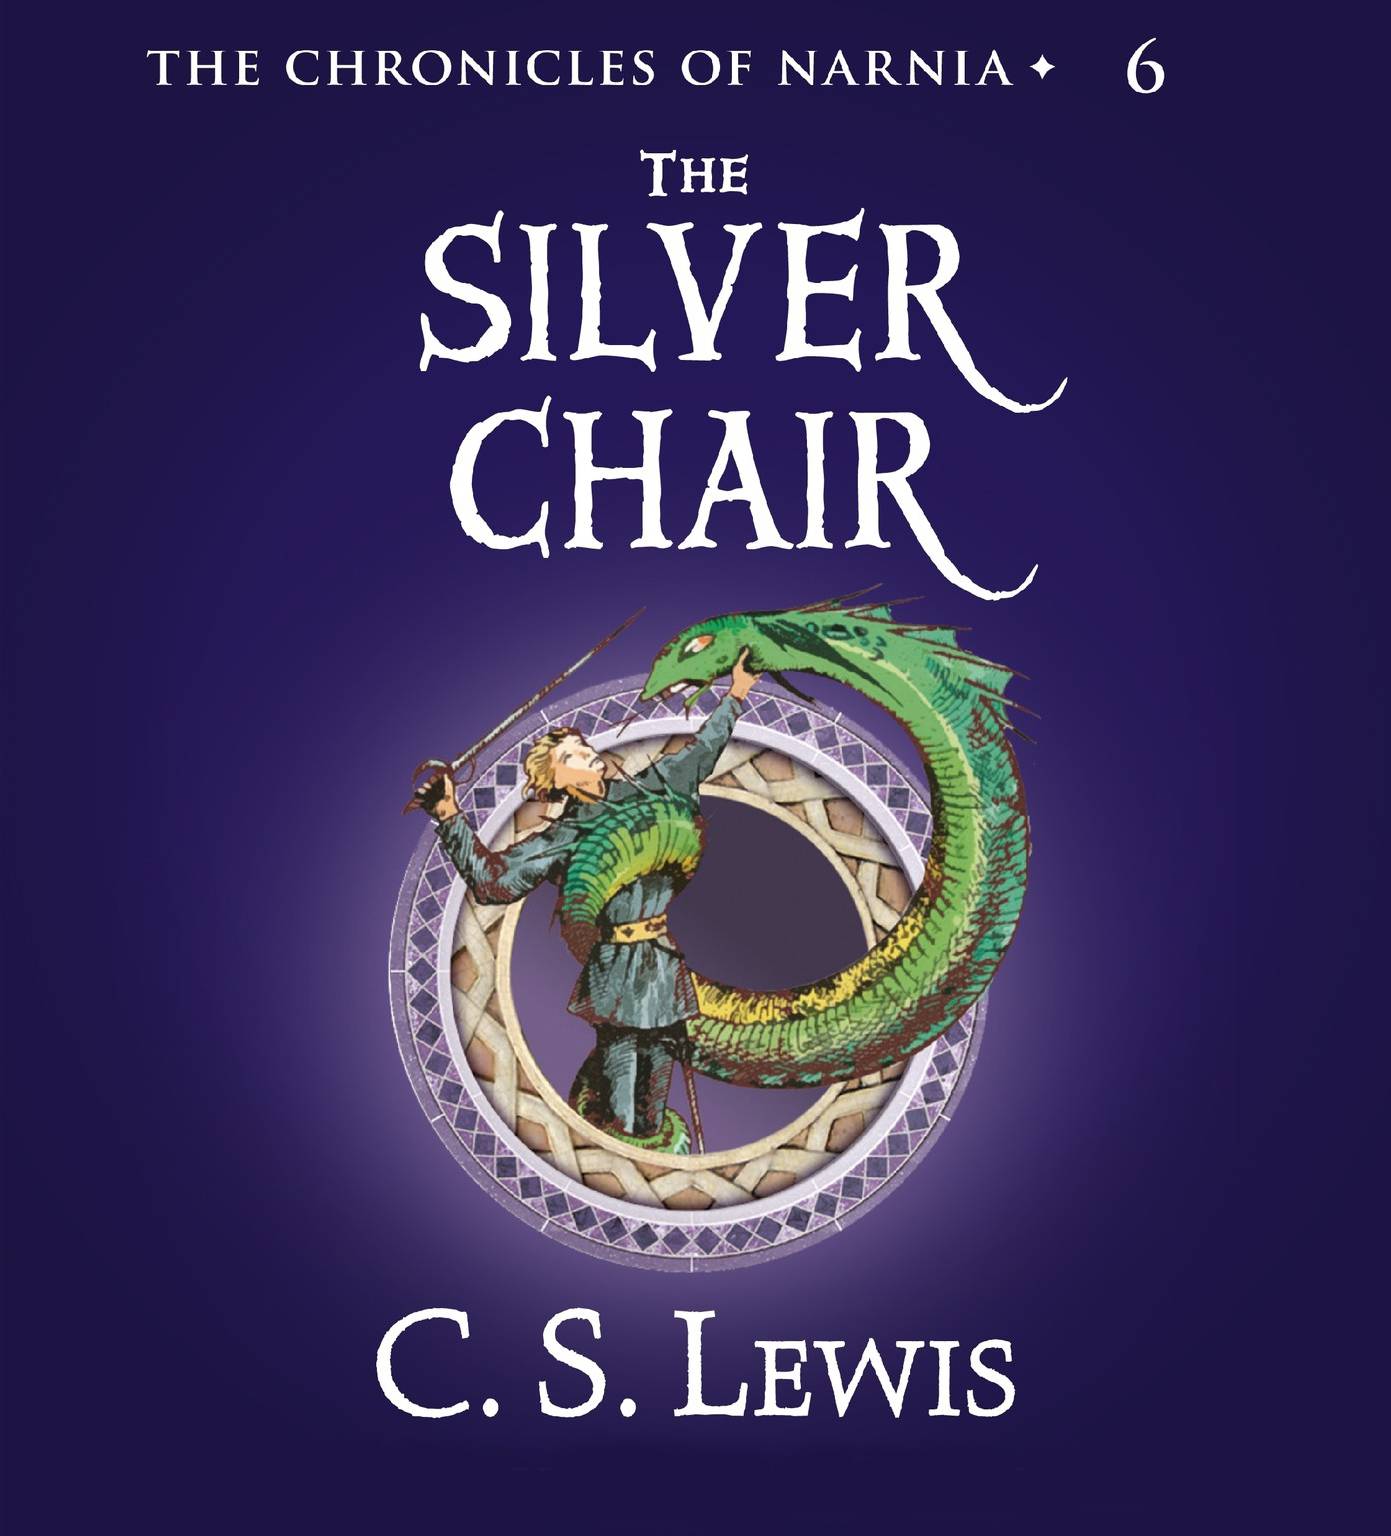 Clive staples Lewis Chronicles of Narnia